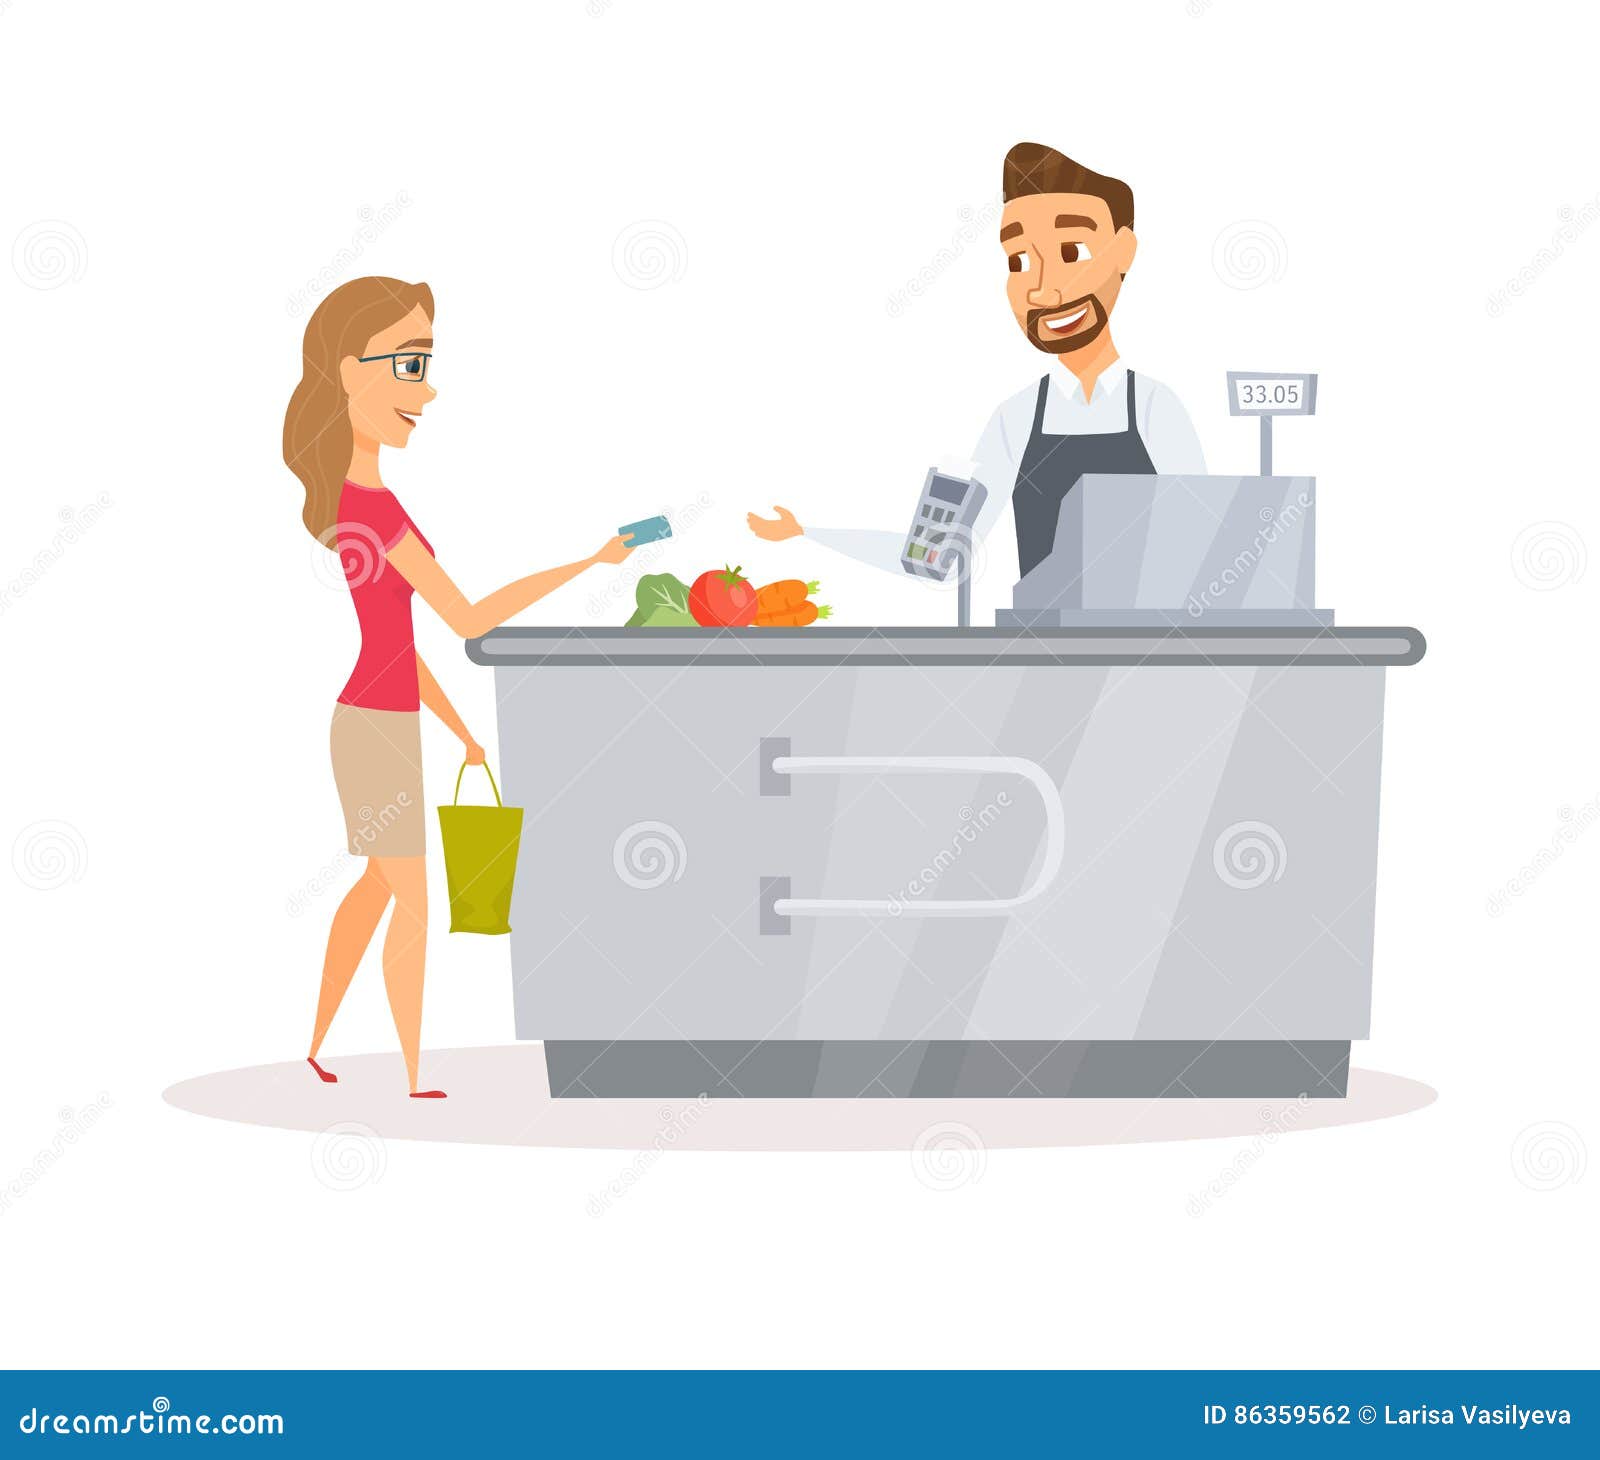 cashier and buyer